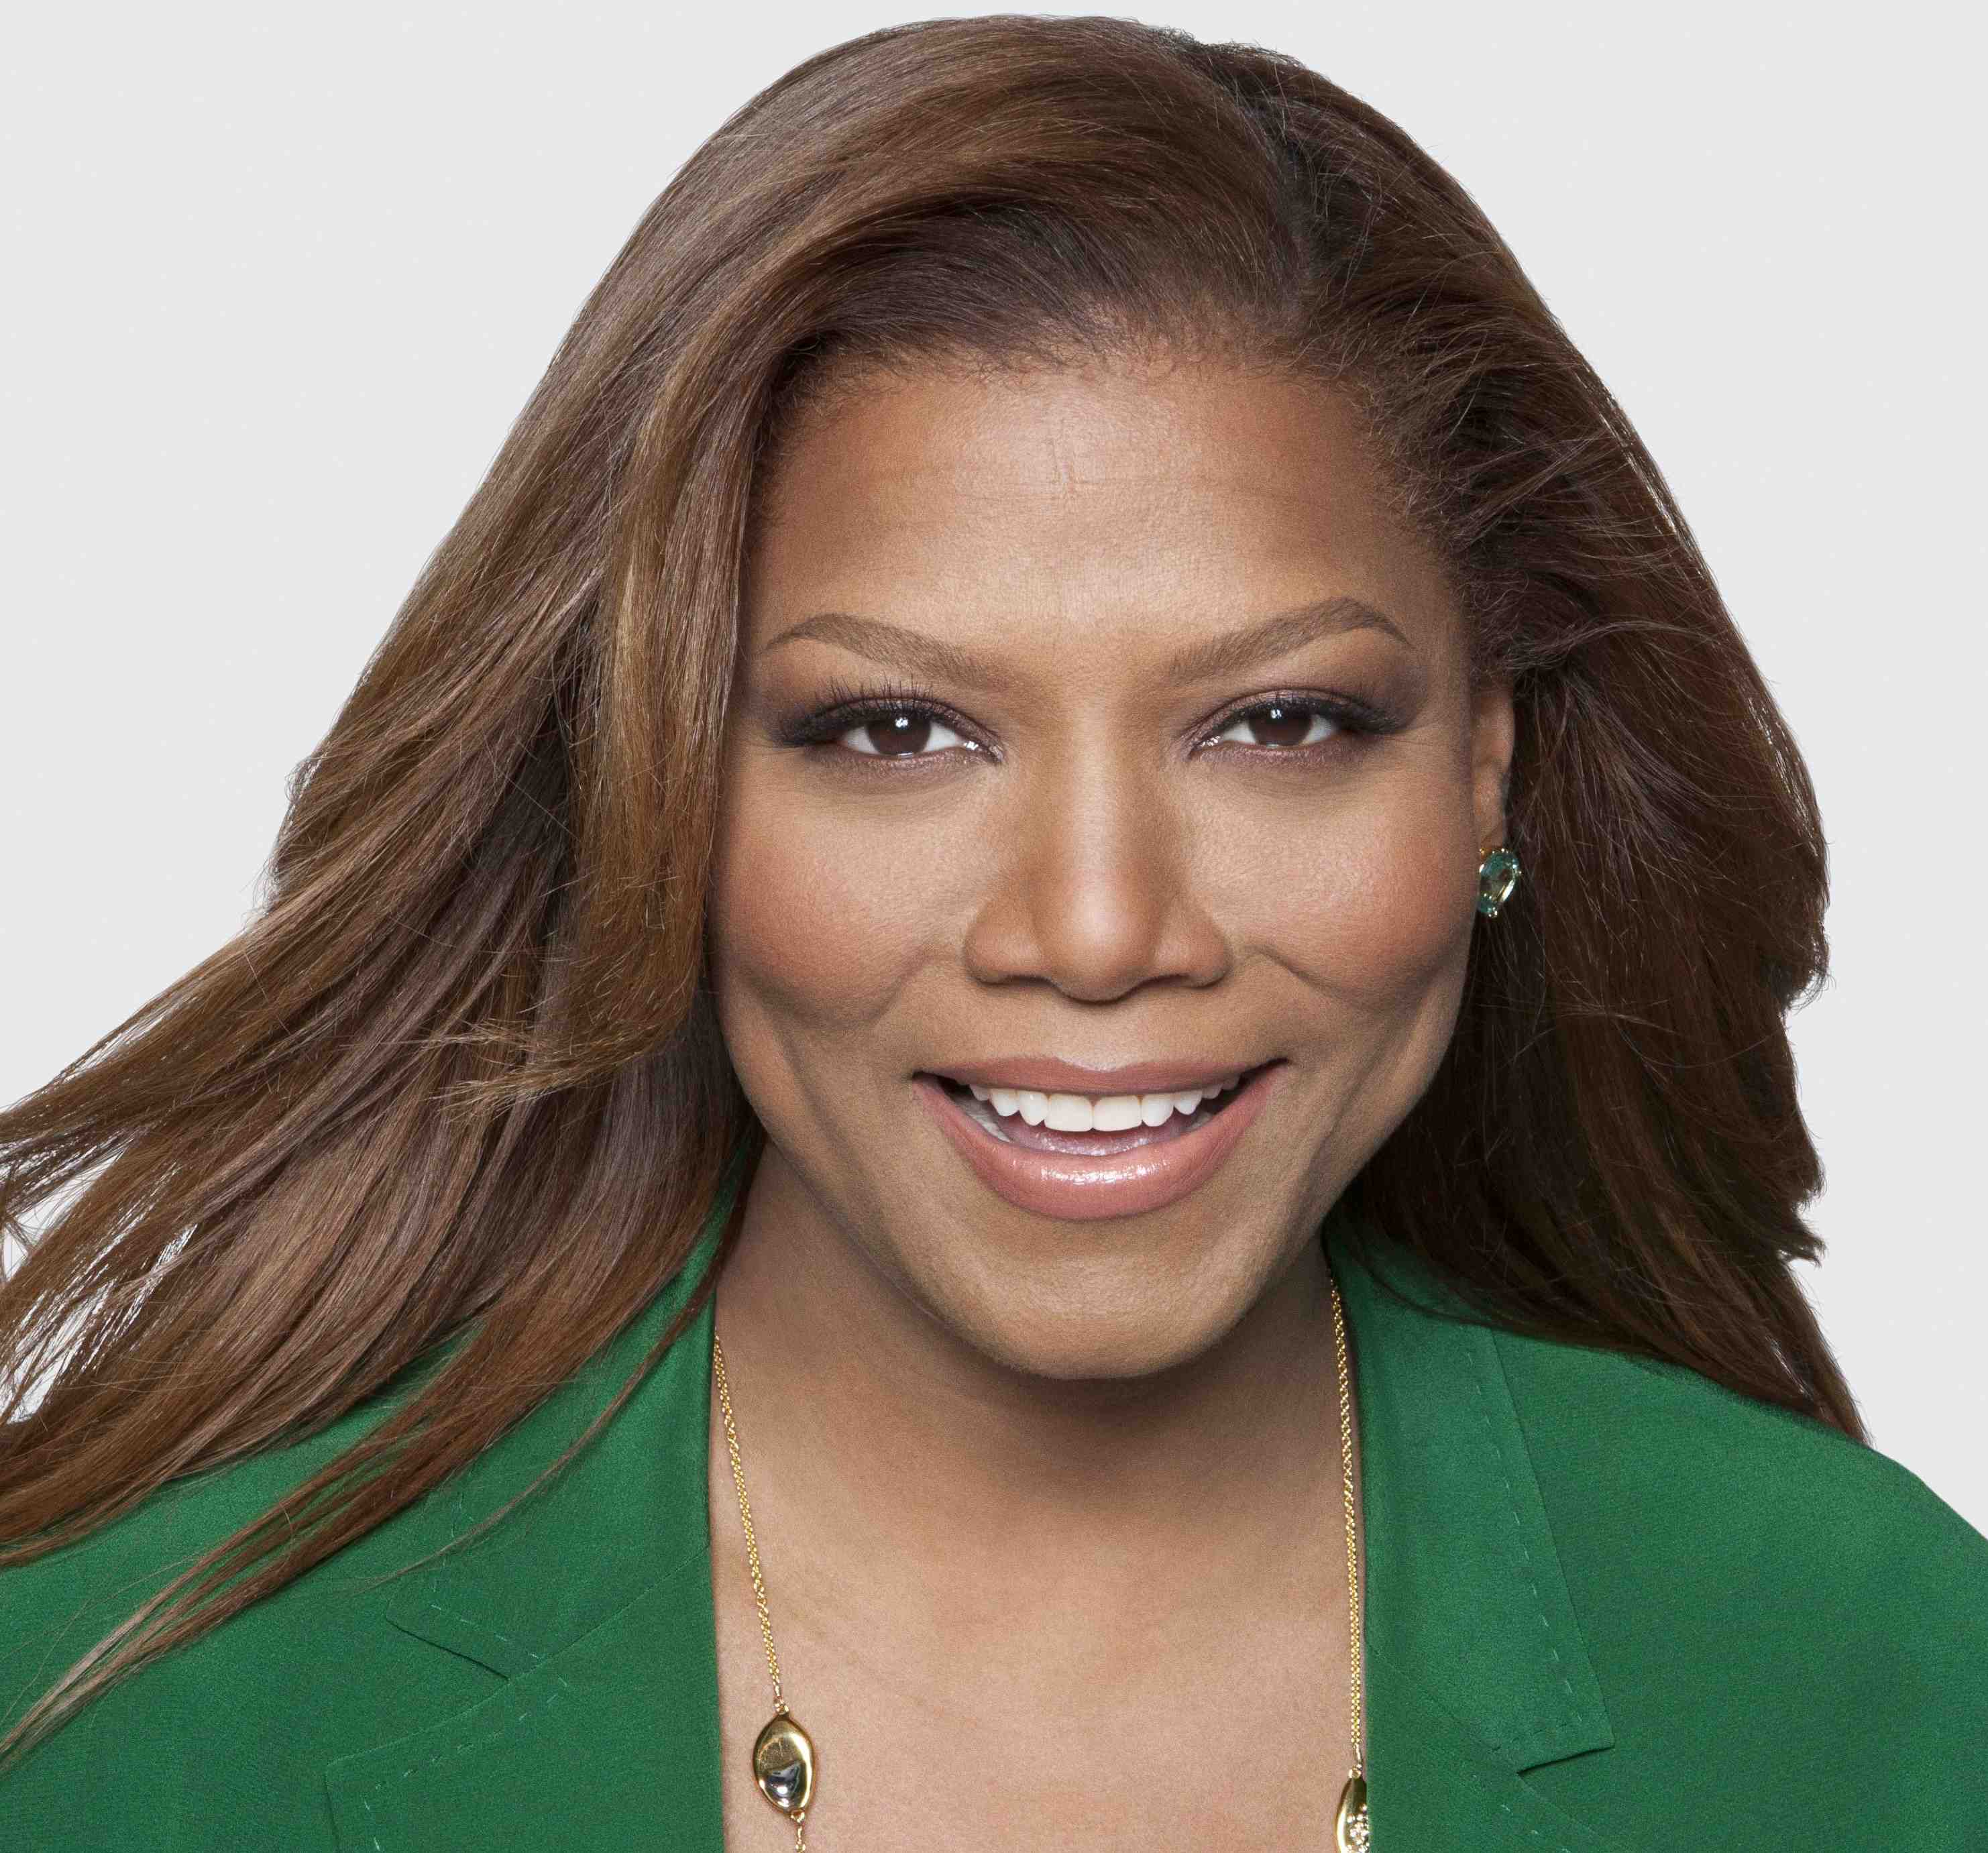 Hip Hop Royalty Queen Latifah Will Receive The Marion Anderson Award